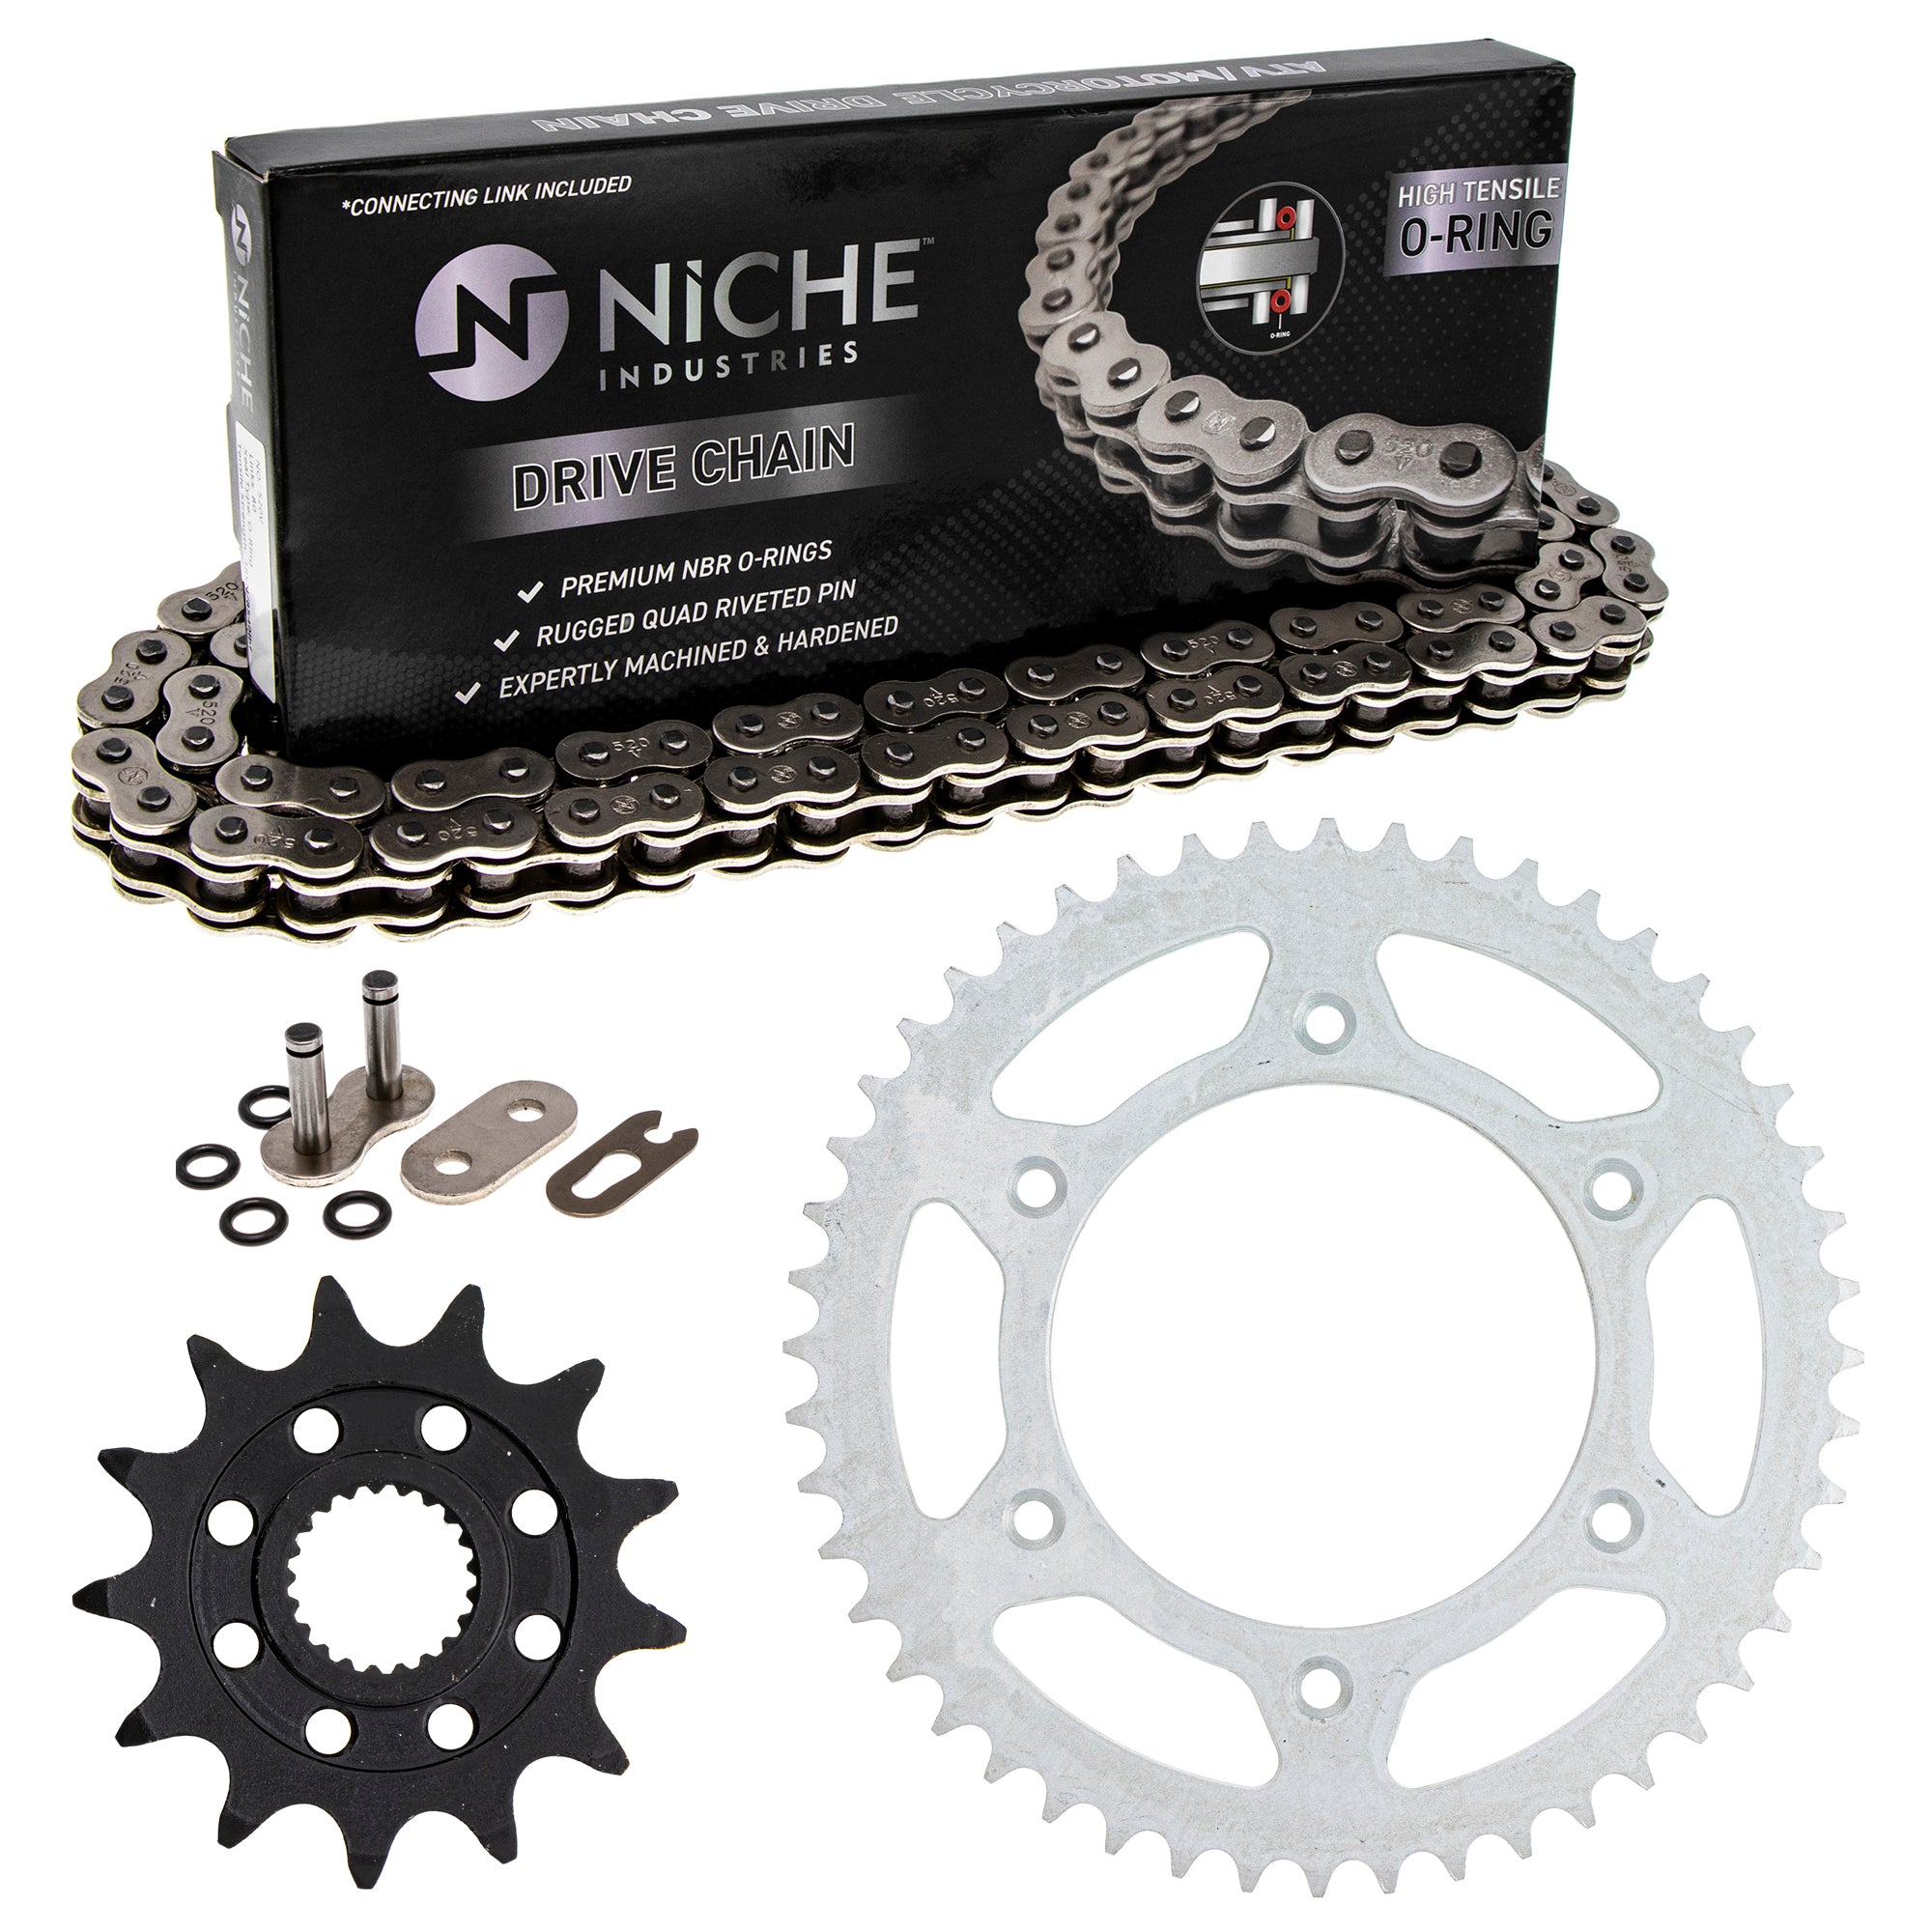 Drive Sprockets & Chain Kit for zOTHER JT Sprocket Honda CRF250R 41202-MKE-A00 NICHE MK1004205